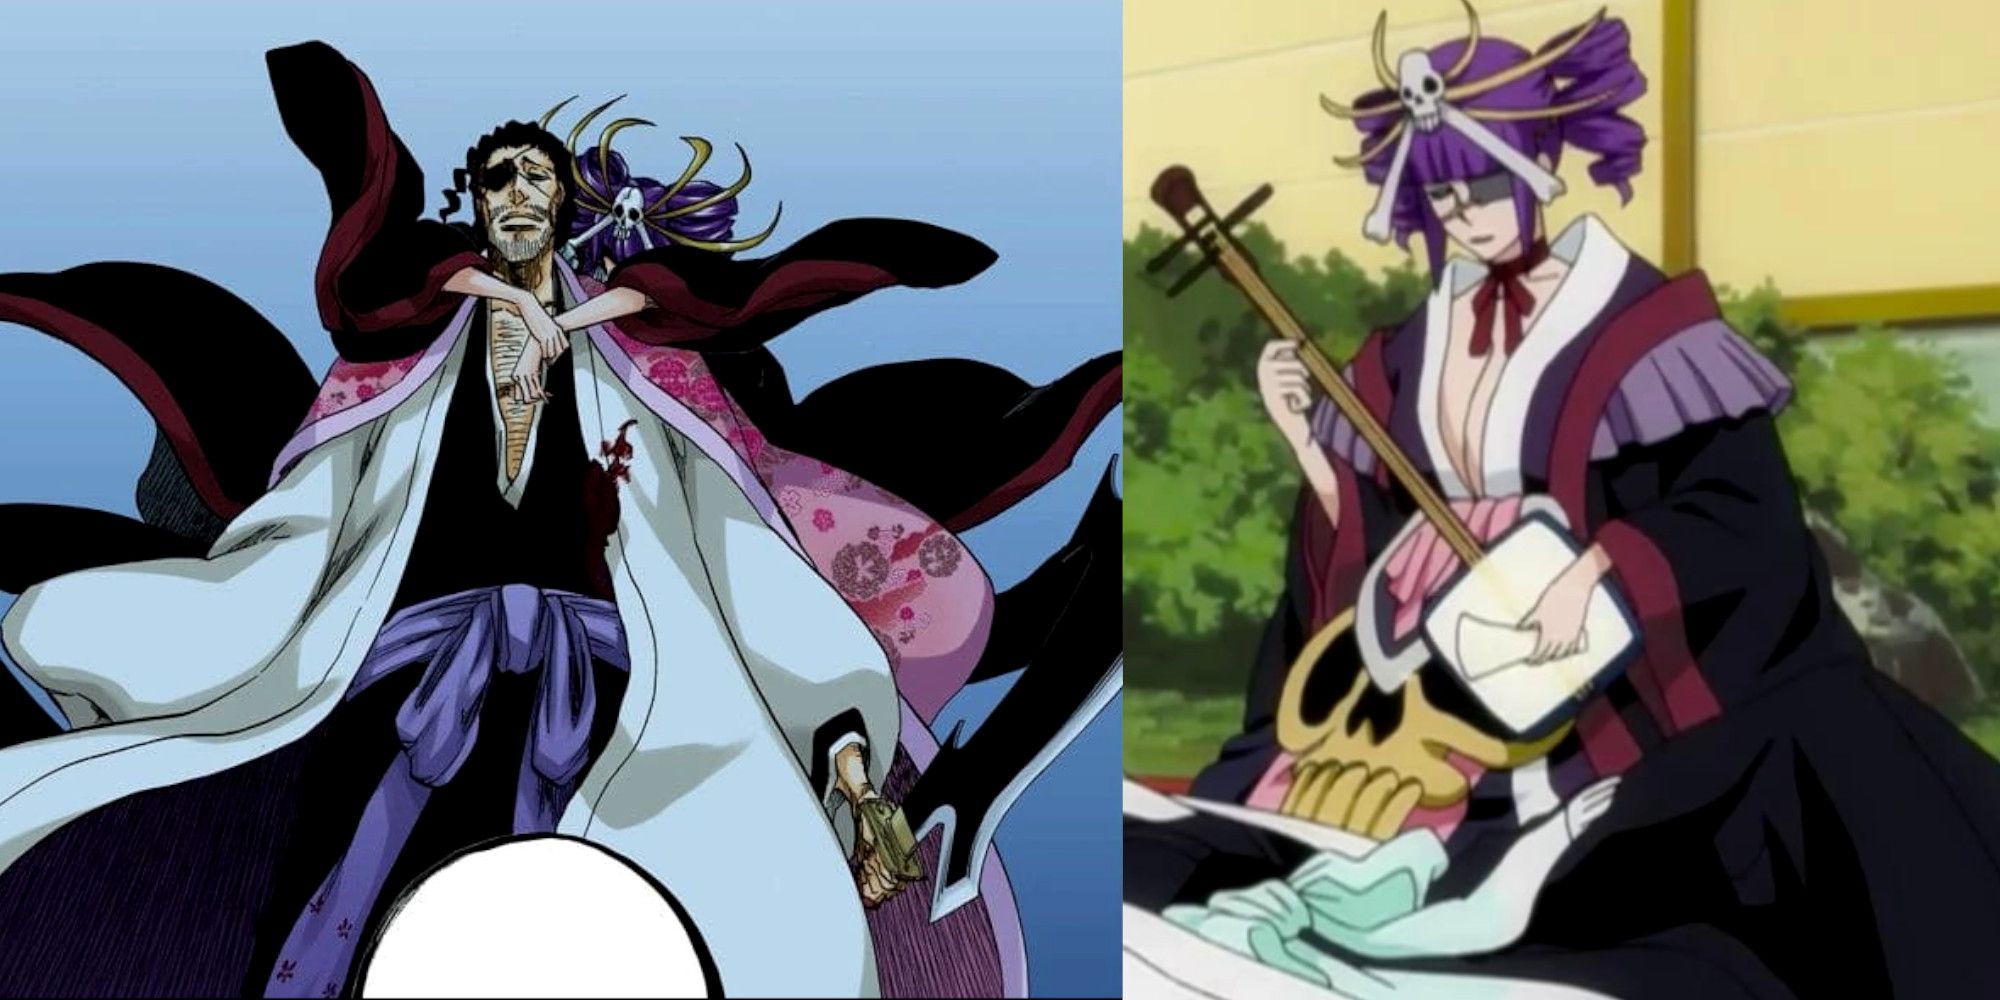 Bleach: 10 Characters With The Coolest Designs Shunsui Kyoraku and Katen Kyōkotsu